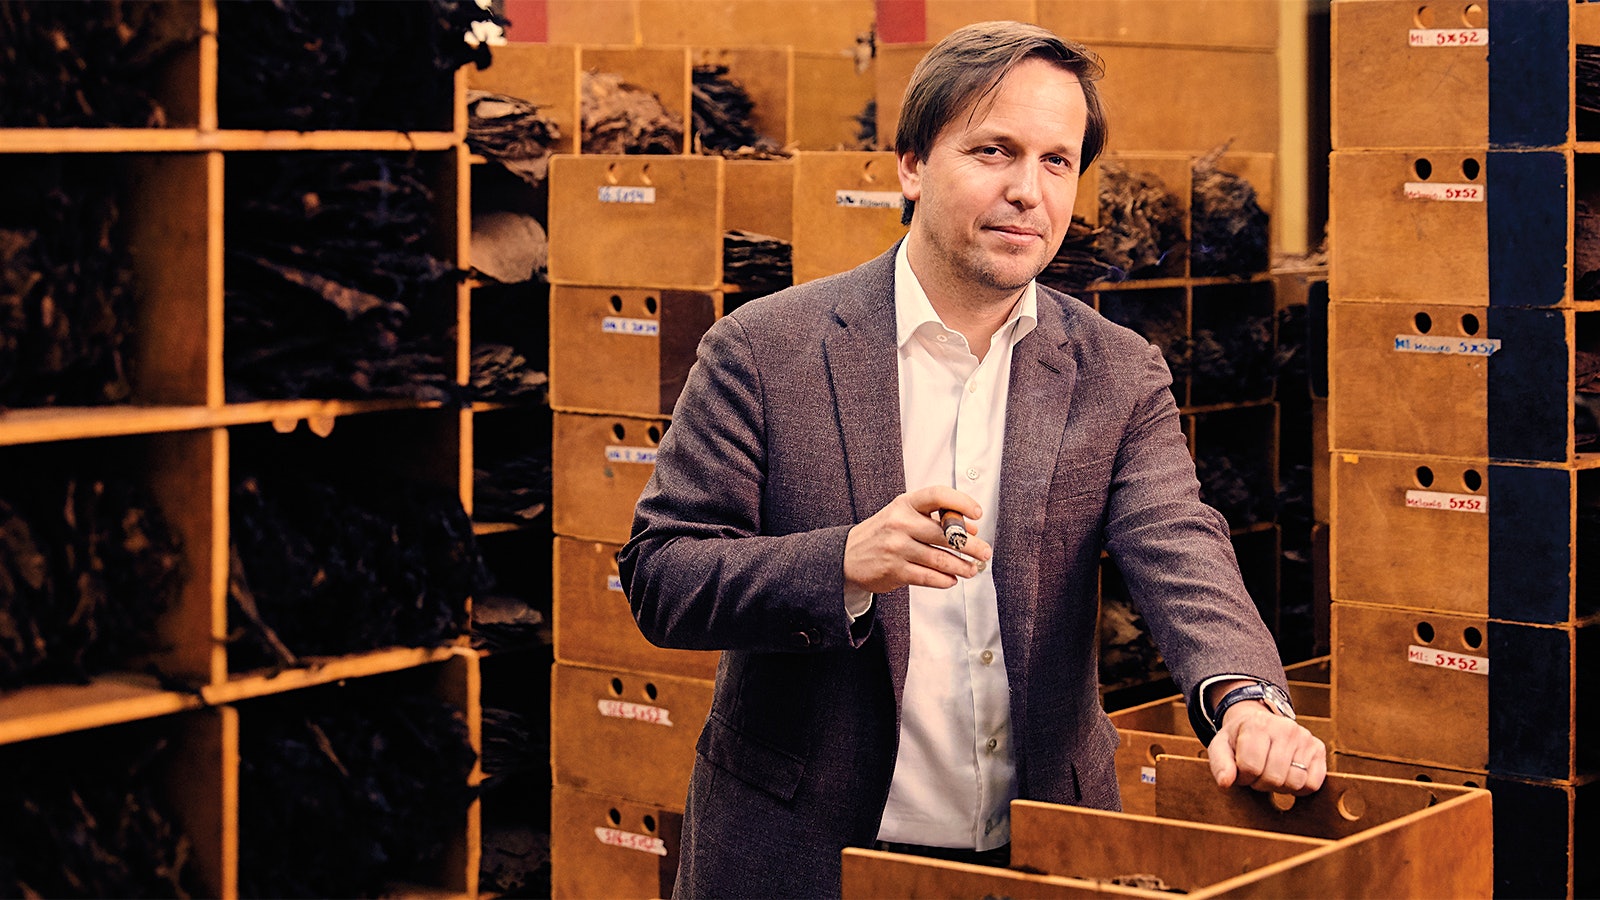 A Conversation With Oliva Cigar Co. Owner: Fred Vandermarliere